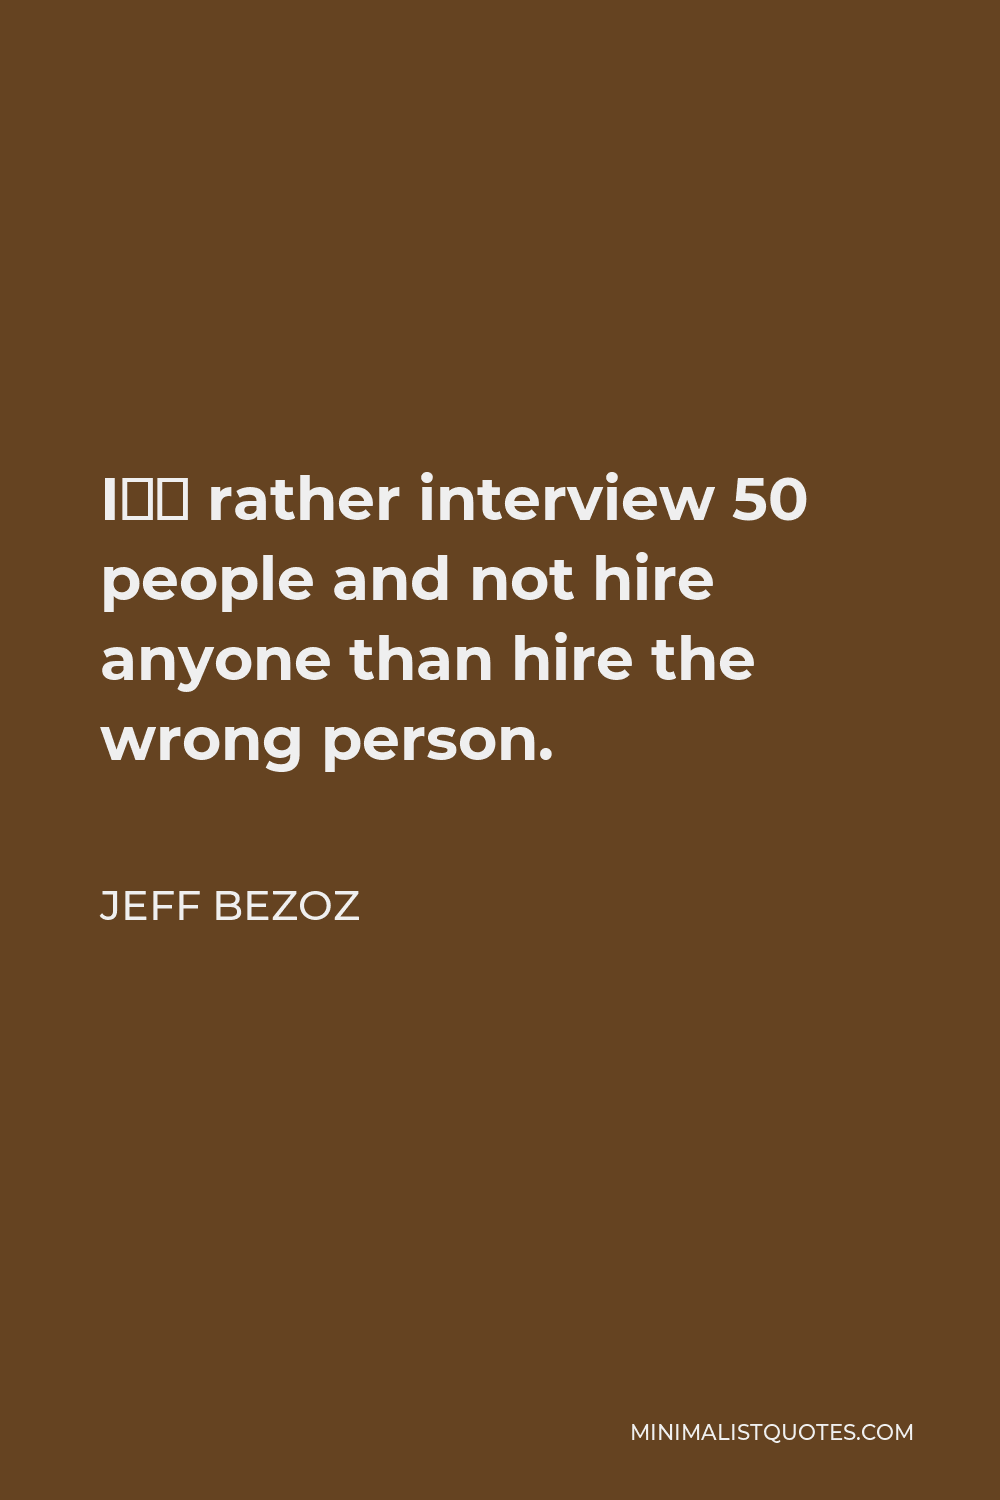 Jeff Bezoz Quote - I’d rather interview 50 people and not hire anyone than hire the wrong person.